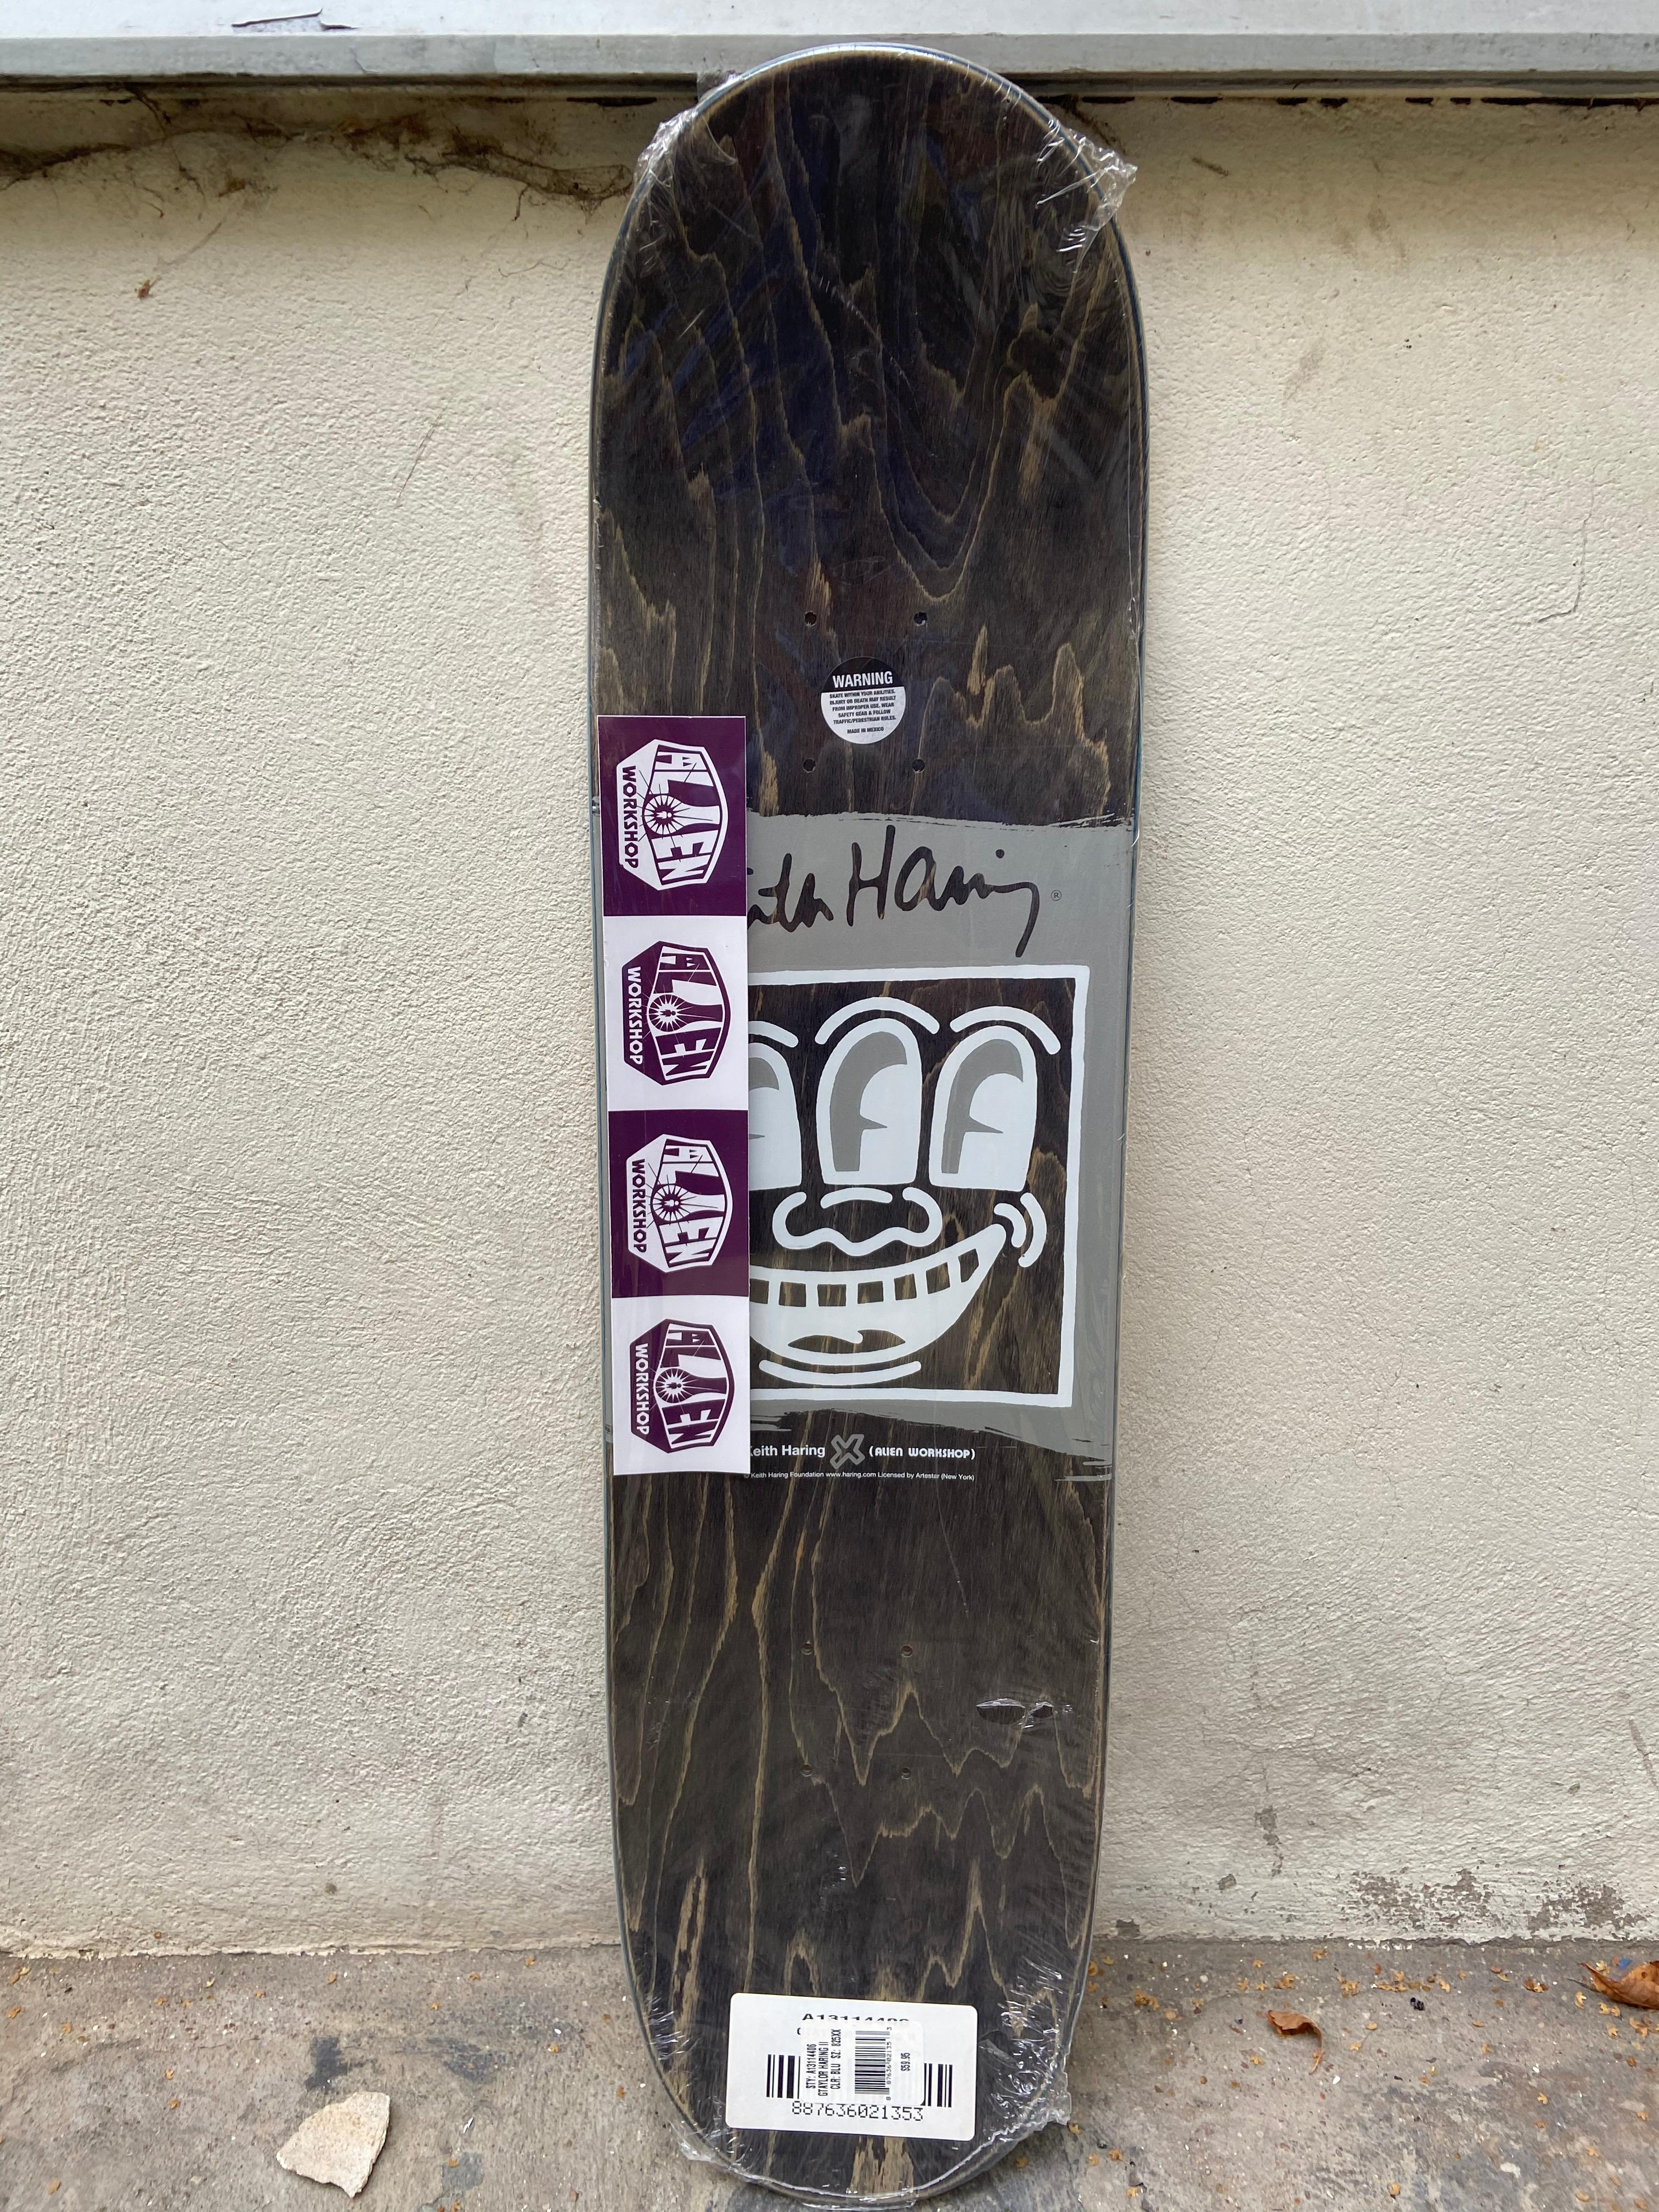 Keith Haring - Baby
Skate board Collector
Published by Alien workshop
circa 2008
Front and back decoration 
80.5 x 20.5 - size 825 XX 
Condition : New 
390 euros.